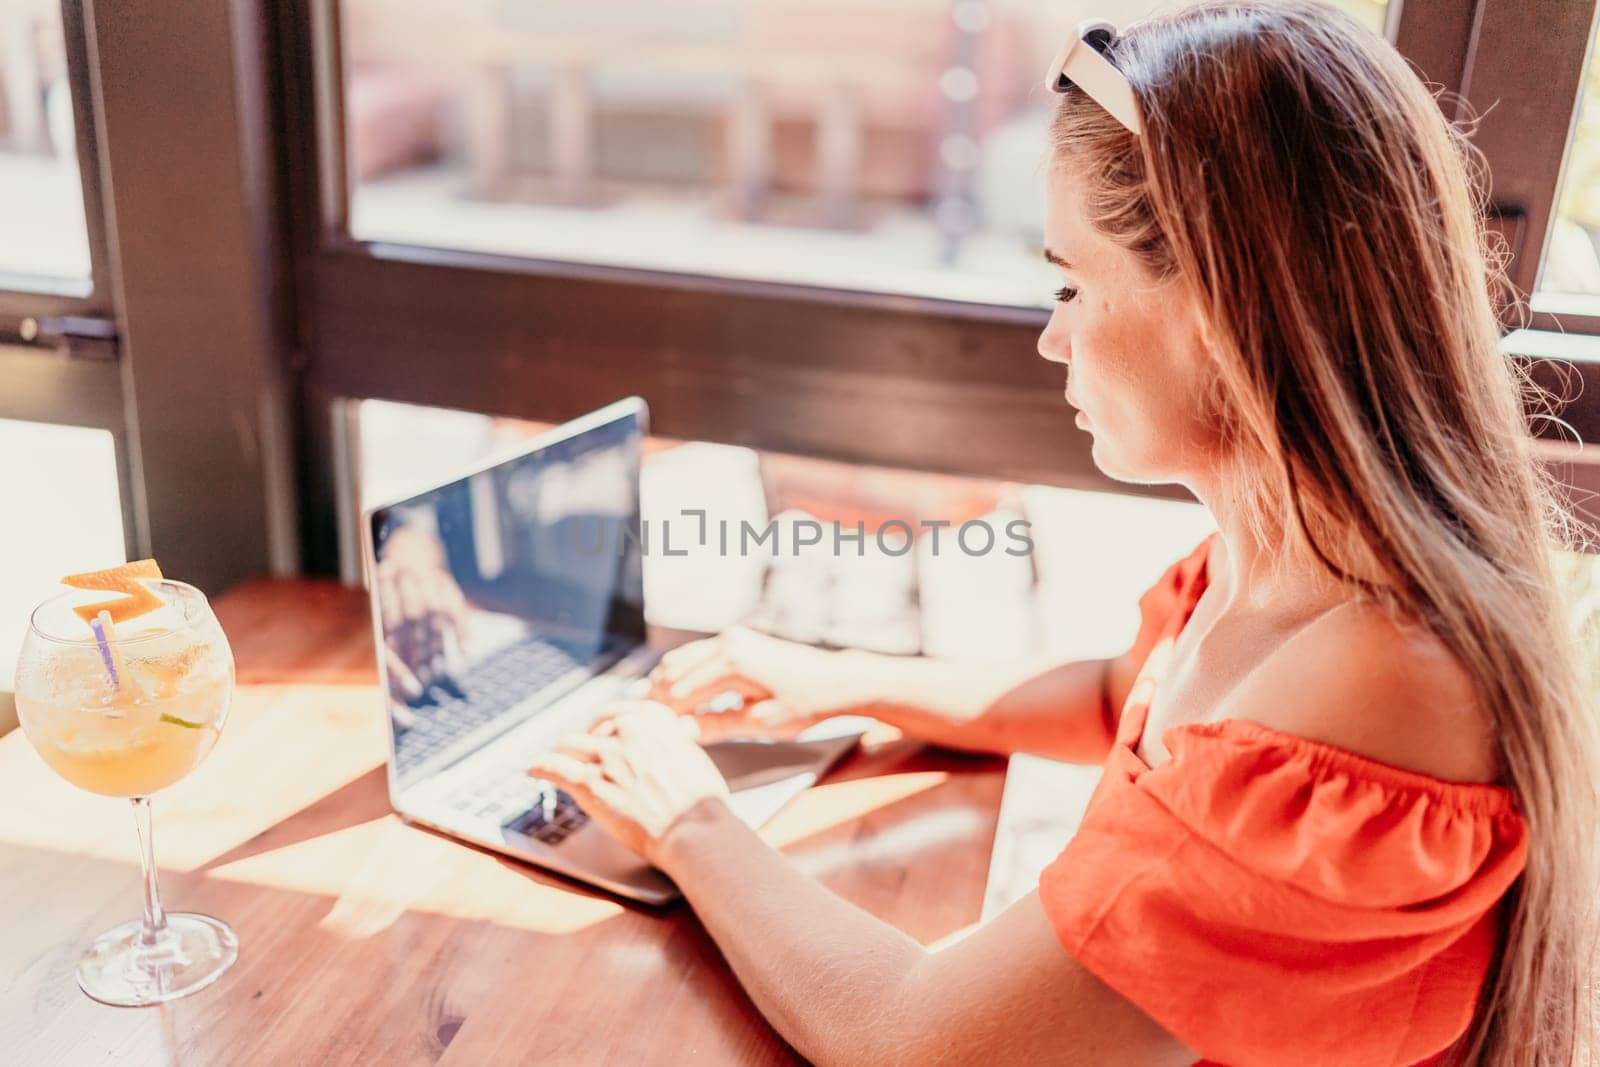 Woman works on laptop in a sunny cafe, glass of juice nearby. The setting is modern, with natural light illuminating the space. The image captures a moment of focused work. by Matiunina